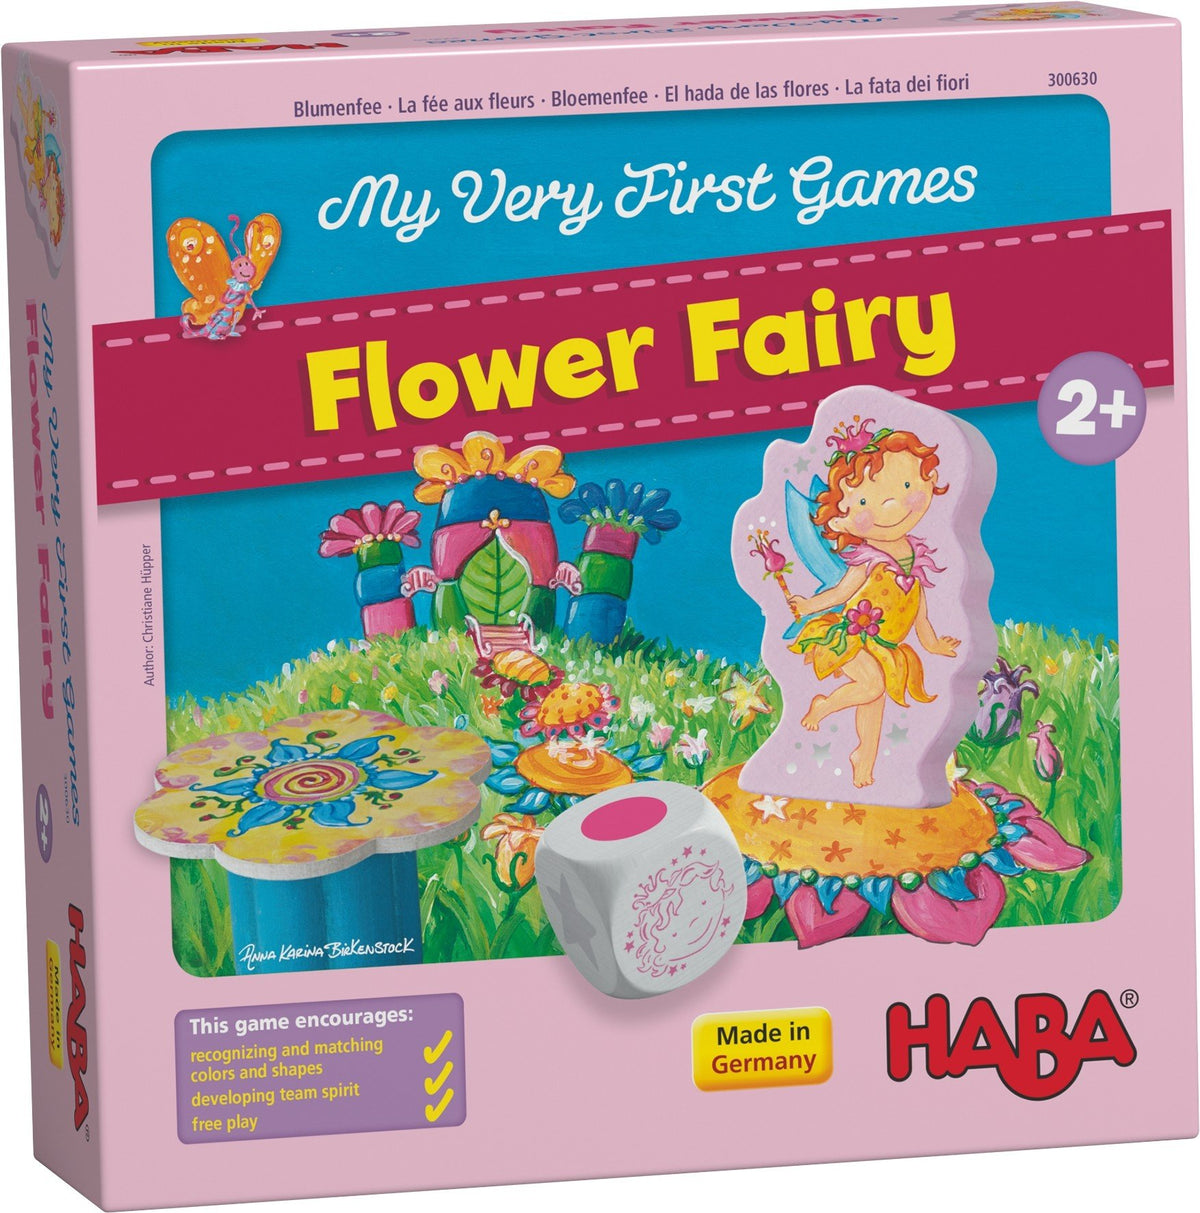 My Very First Games Flower Fairy